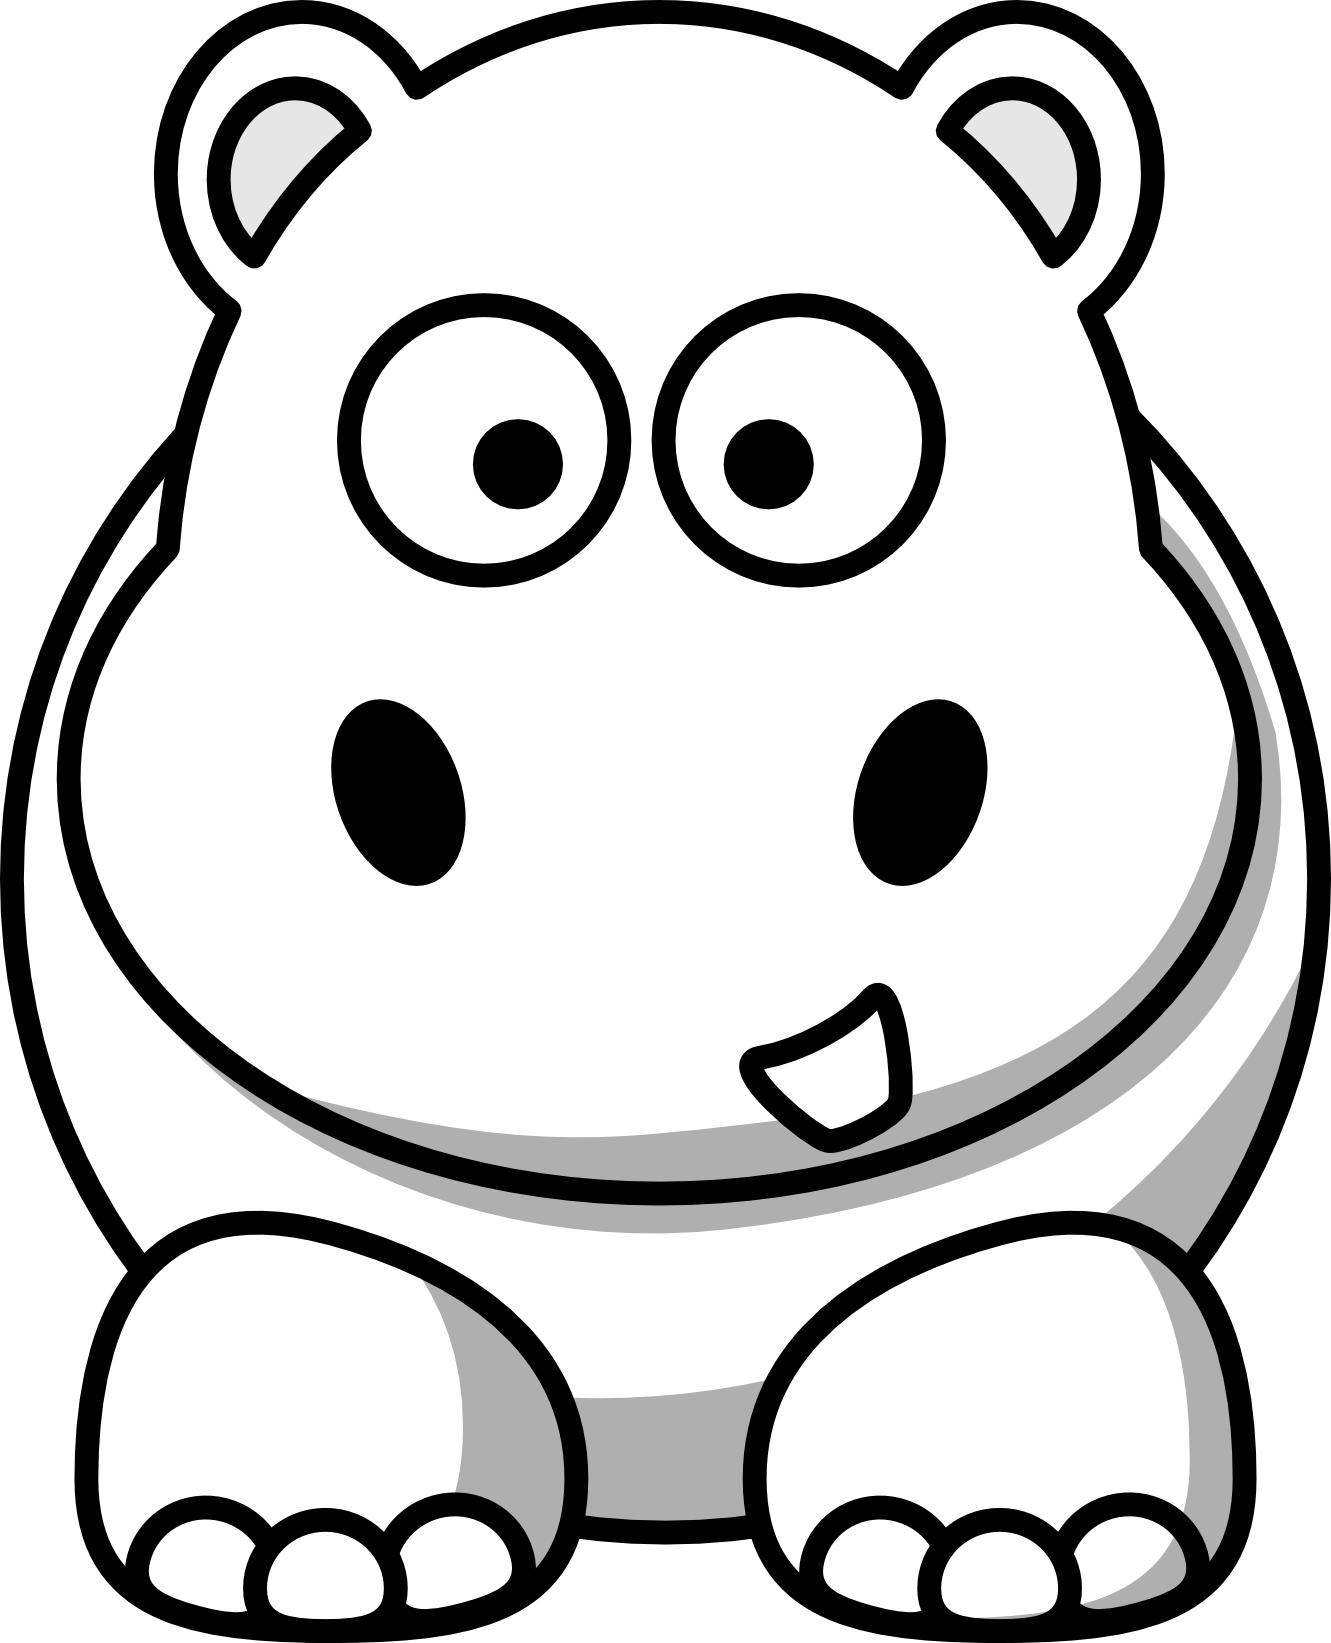 Hippo Clip Art Black And White - Free Clipart Images